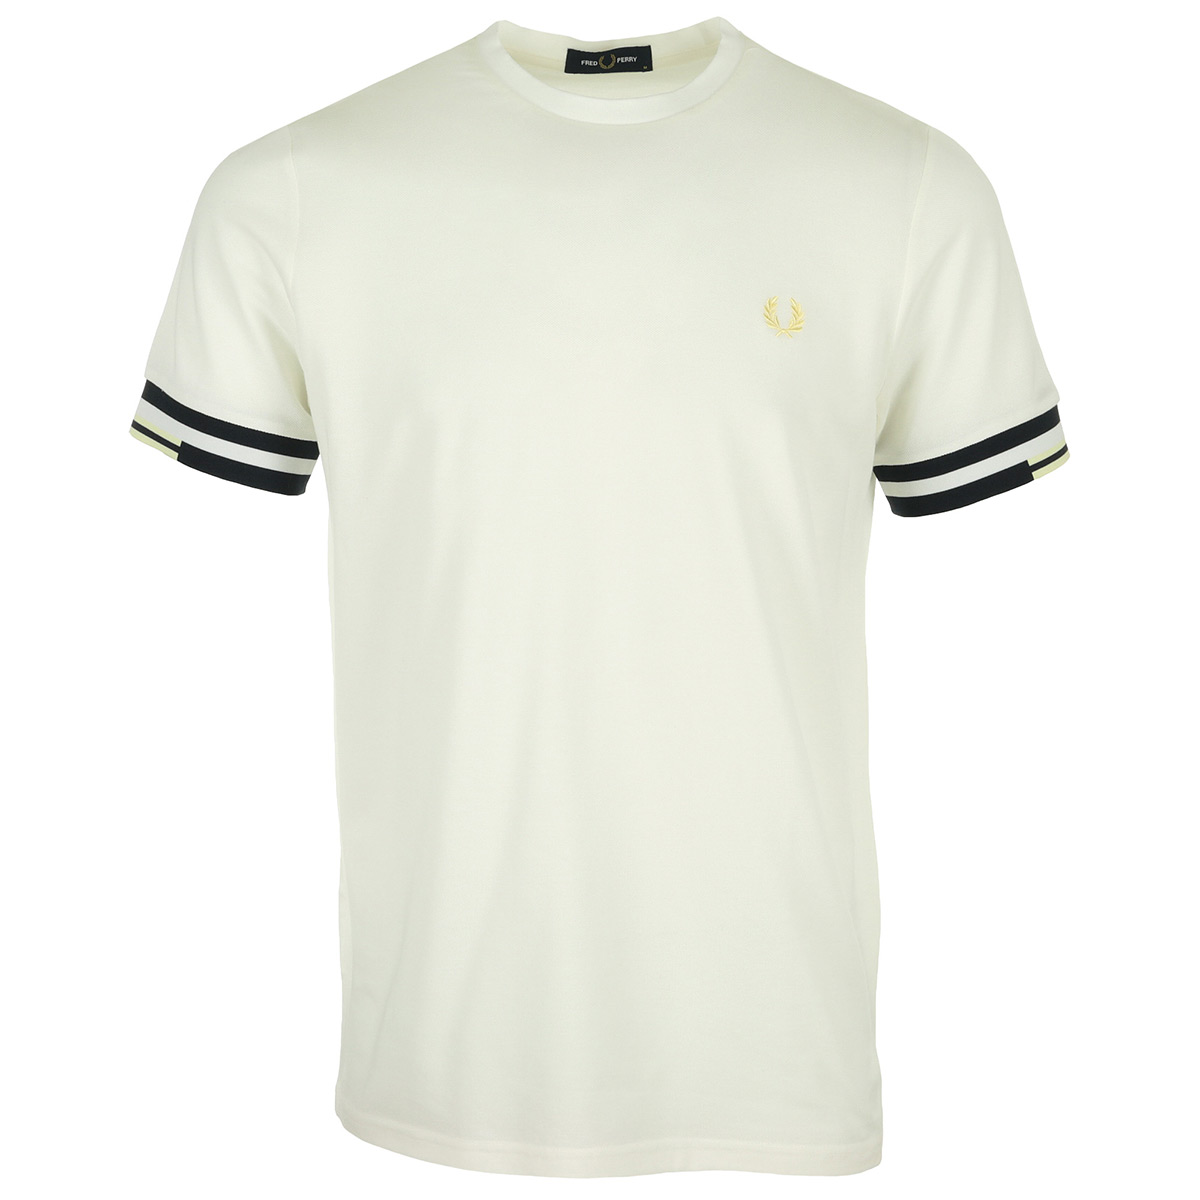 Fred Perry "Abstract Cuff T-Shirt"